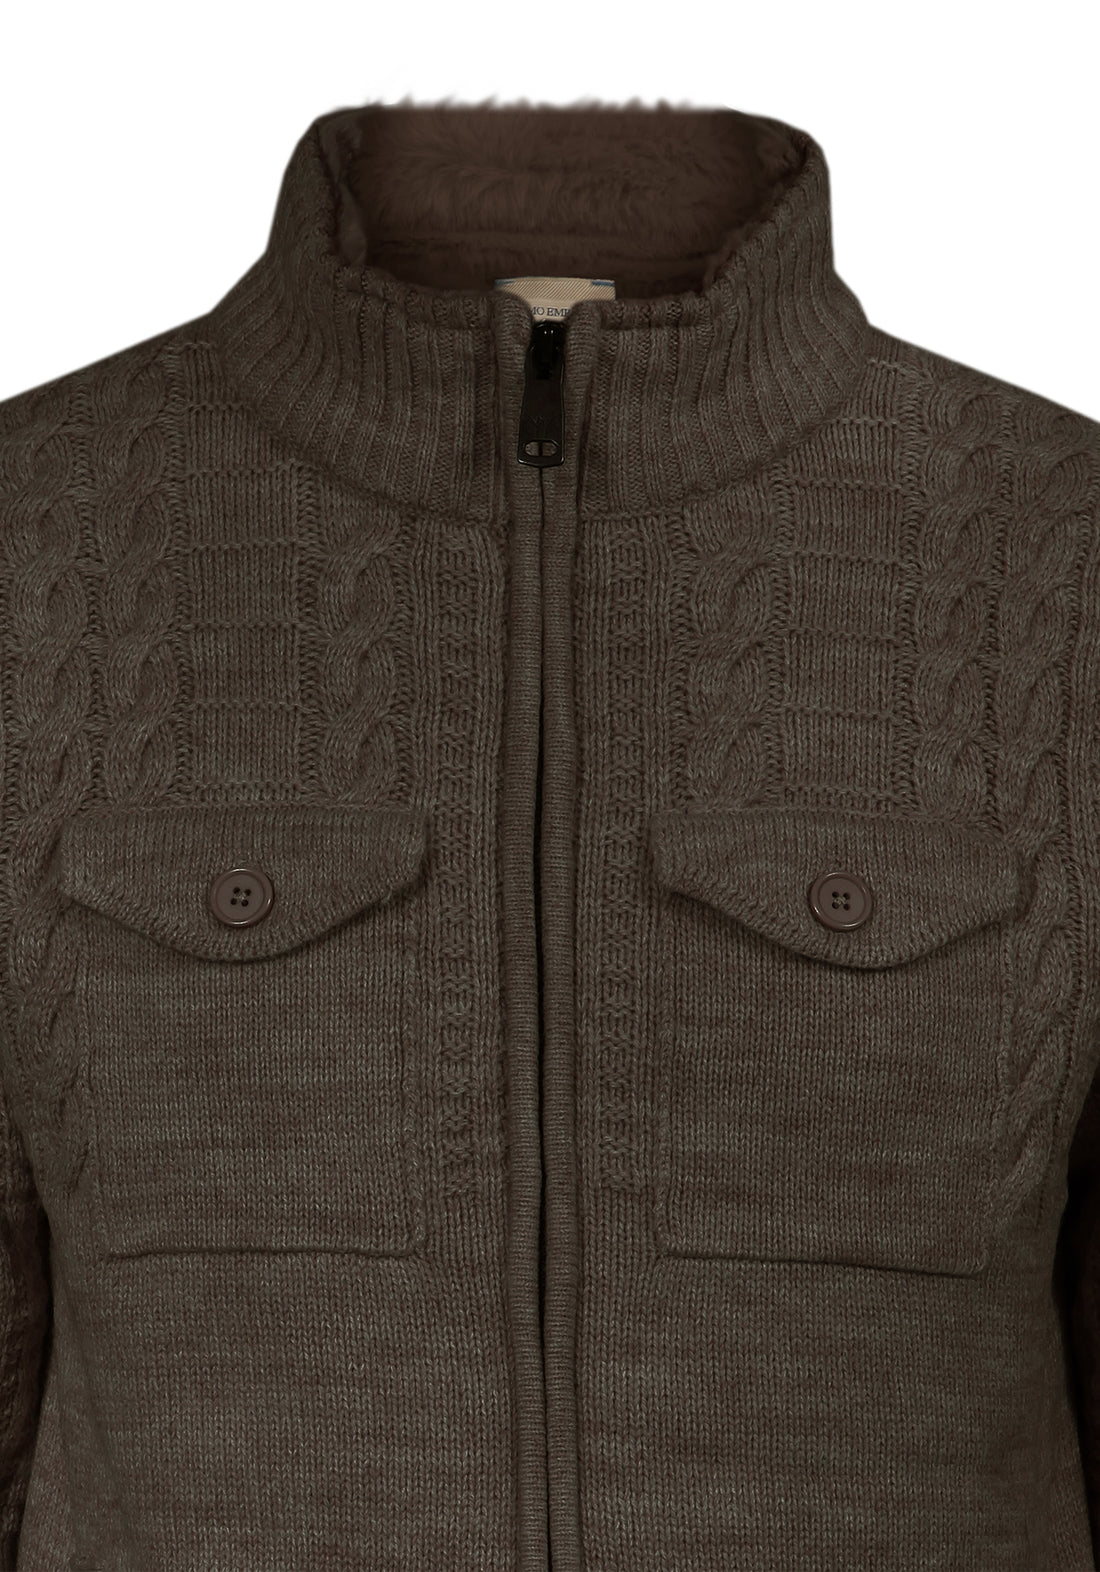 Sweater with two internal pockets in fur - Brown -